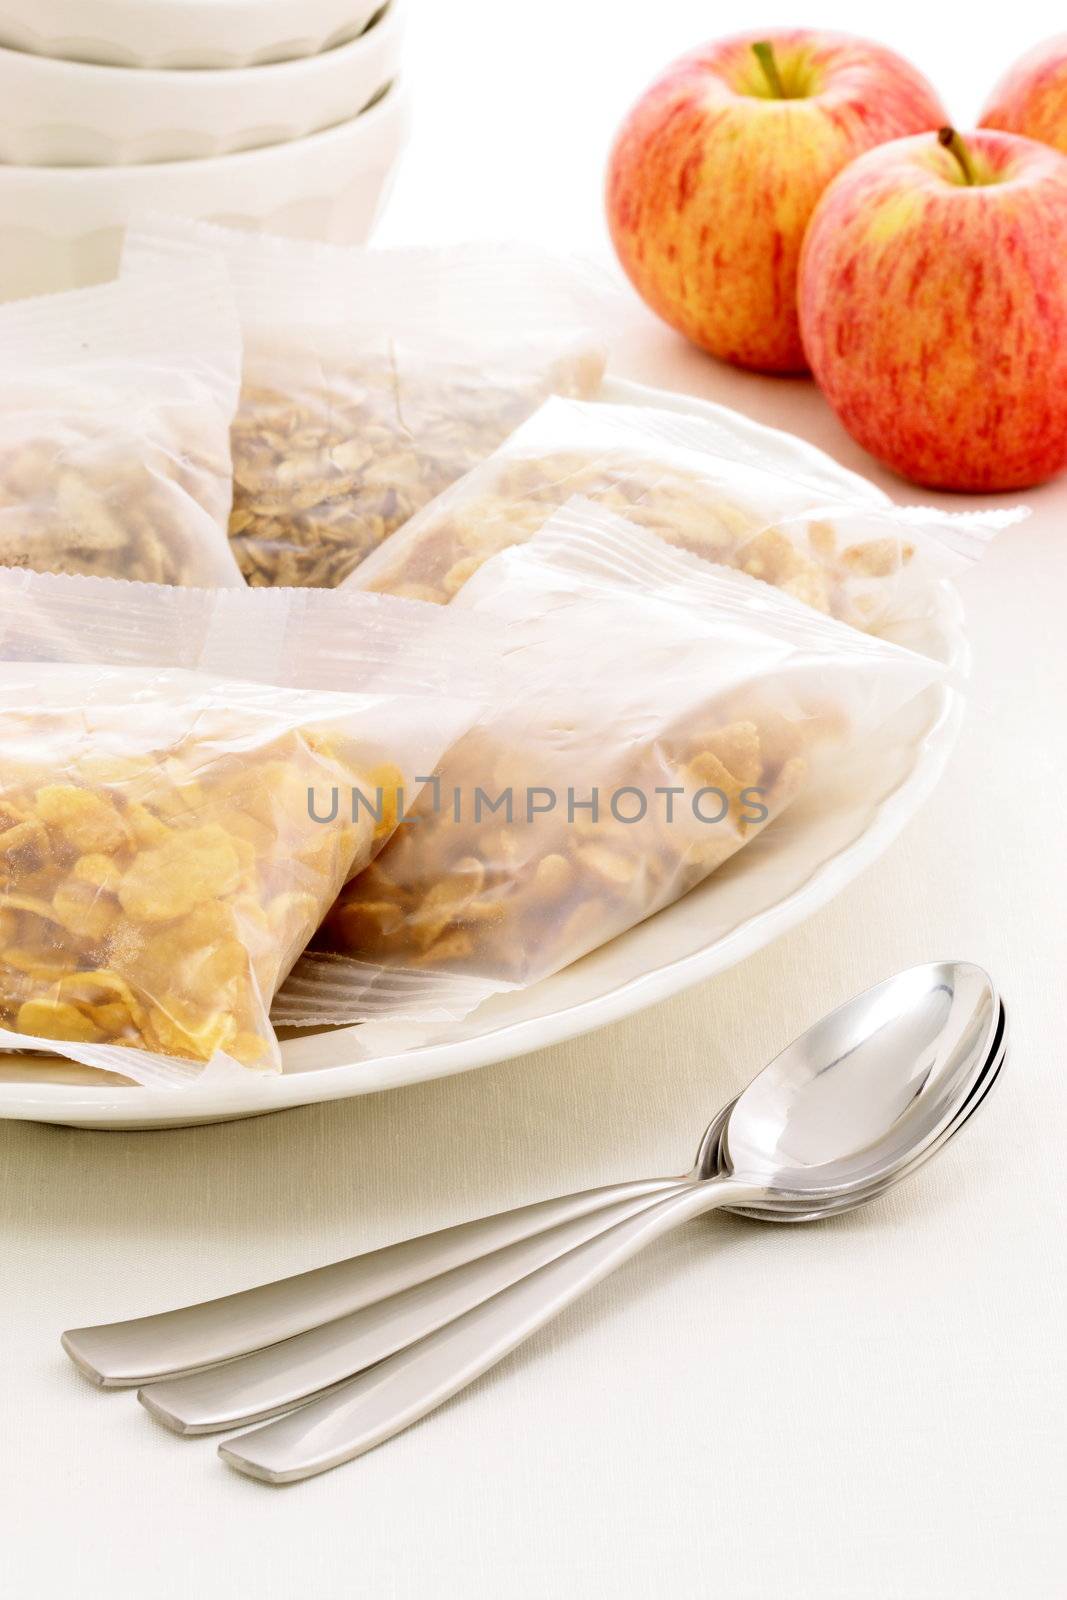 delicious, healthy and assortes cereal bags  and nutritious apples with  French Cafe au Lait Bowls 